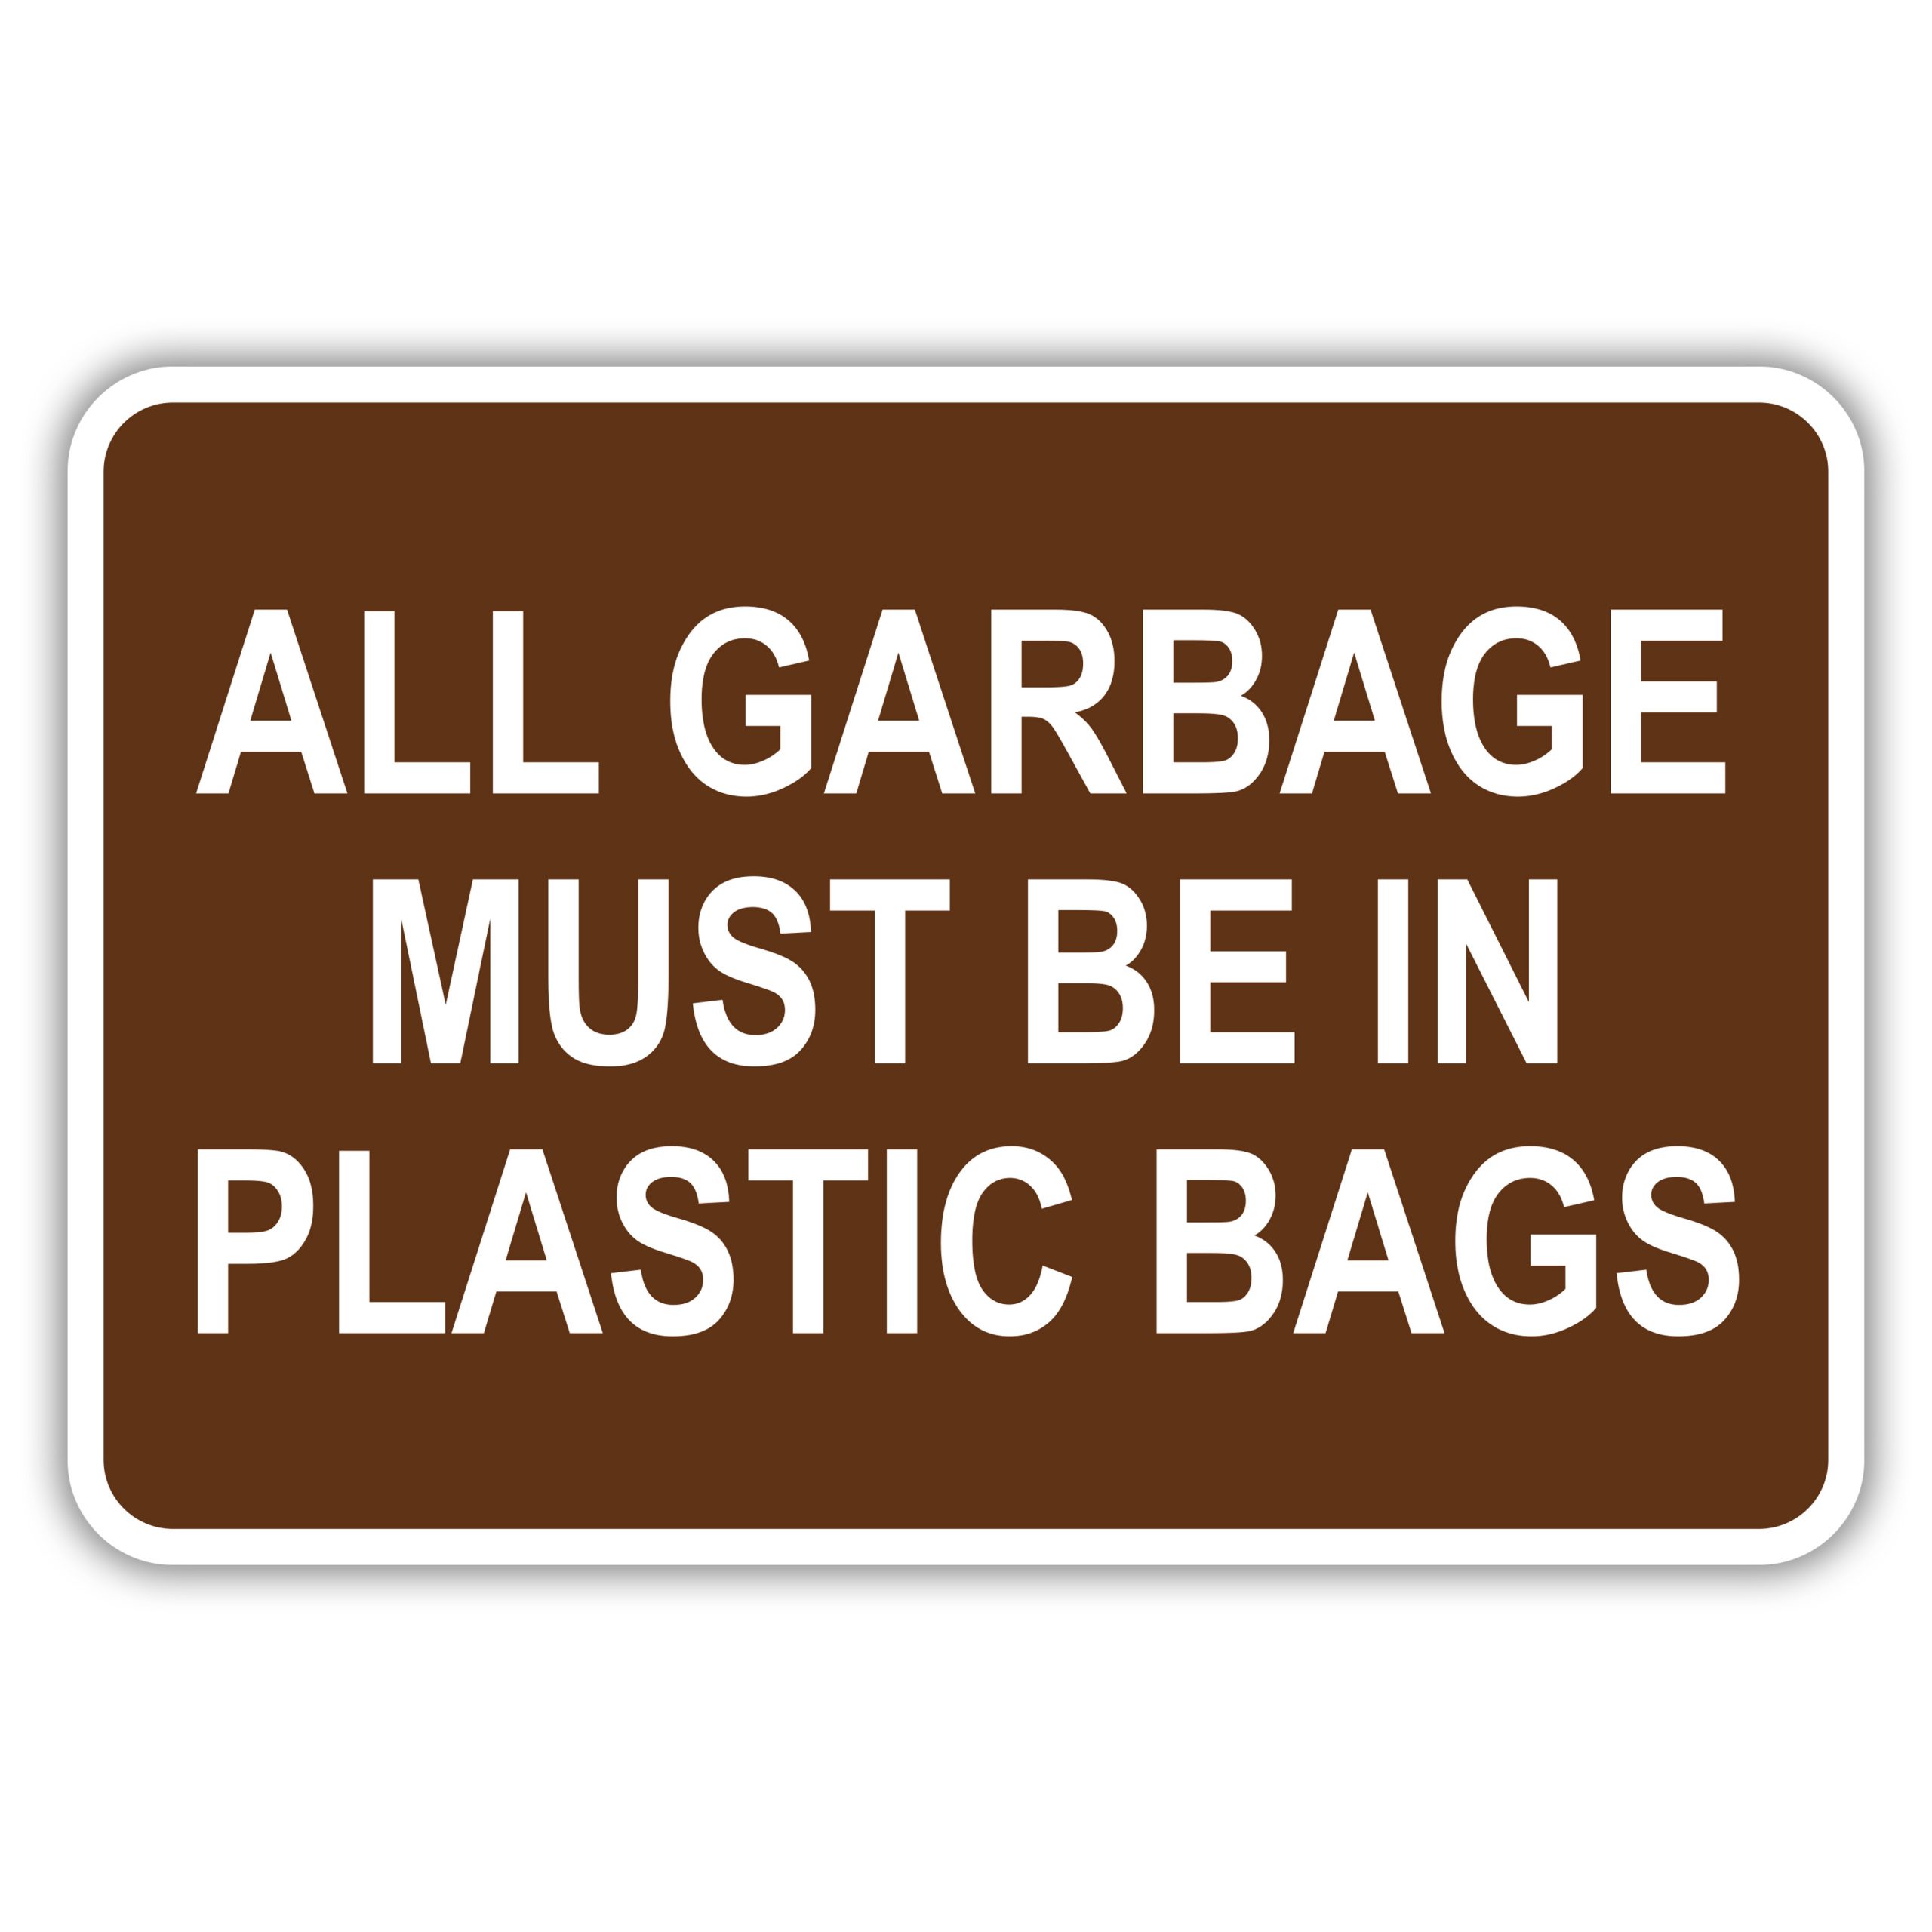 ALL GARBAGE IN PLASTIC BAGS - American Sign Company